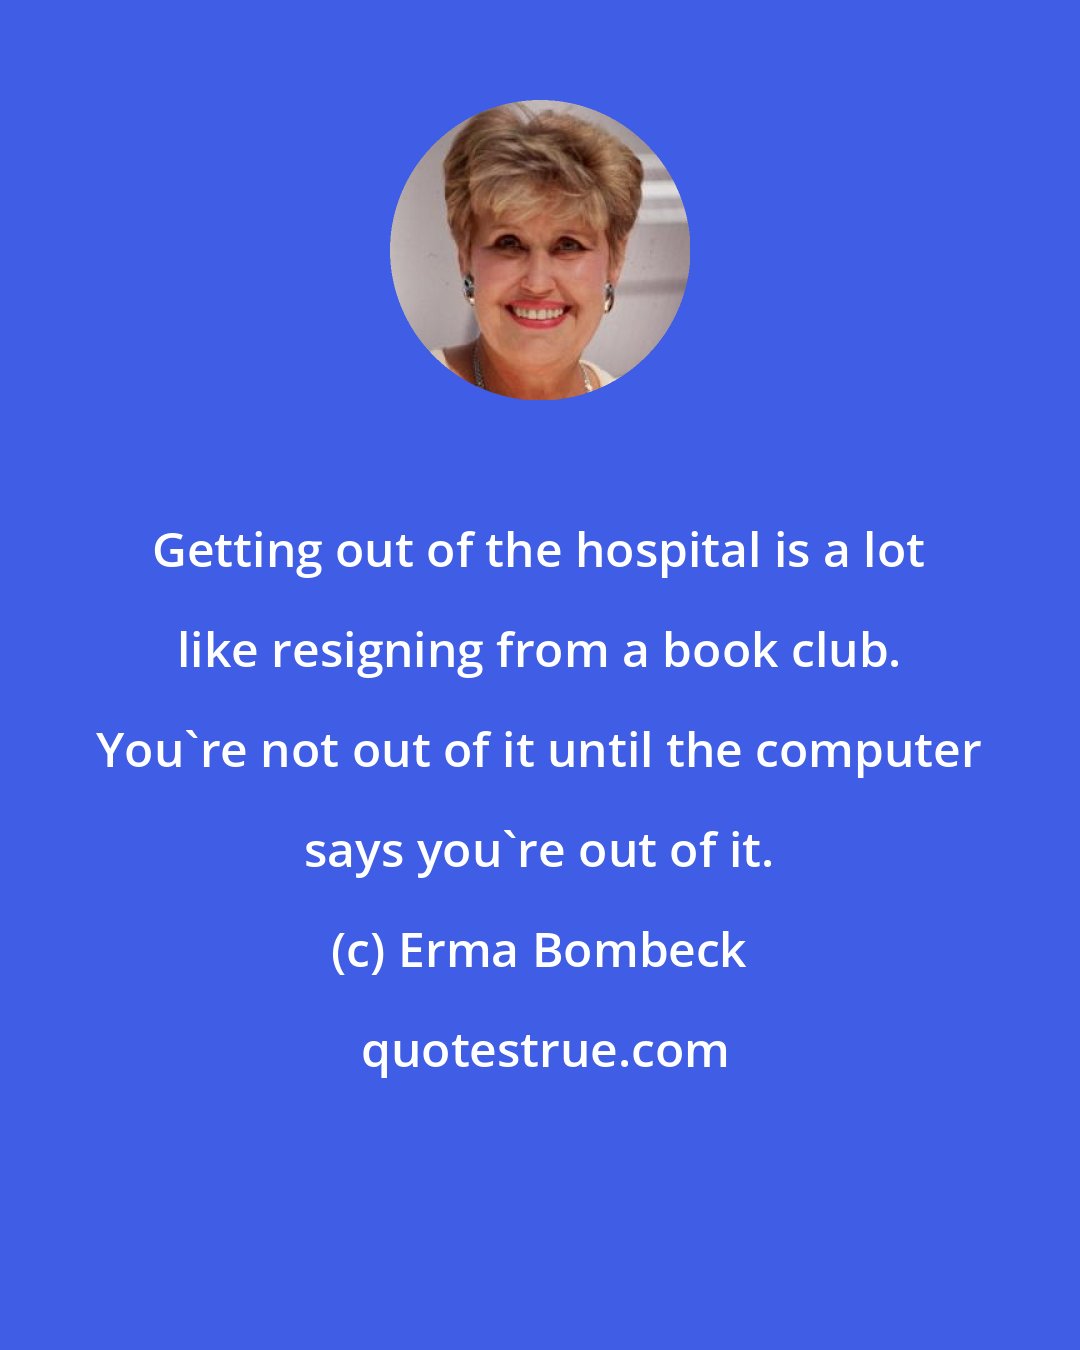 Erma Bombeck: Getting out of the hospital is a lot like resigning from a book club. You're not out of it until the computer says you're out of it.